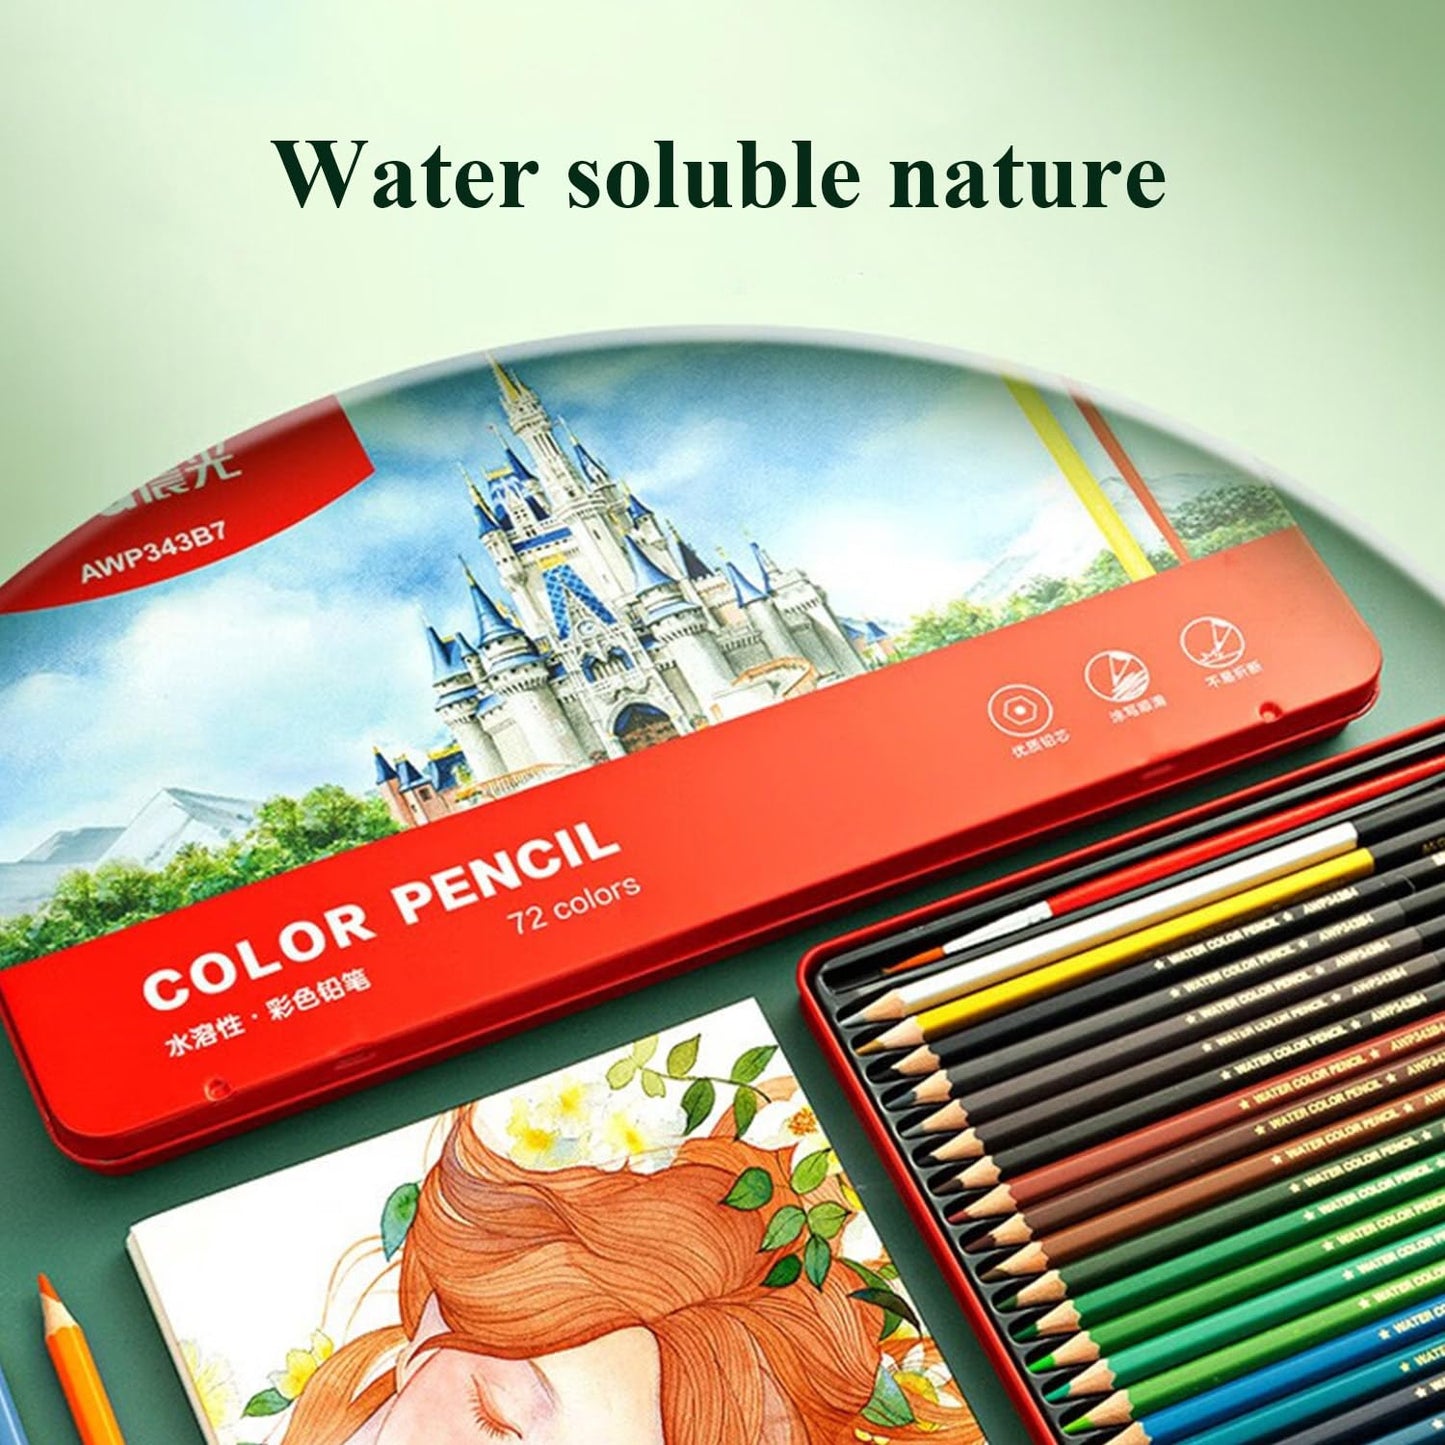 M&G 72 Colored Pencils for Adults Coloring, Professional Vibrant Artists Pencil Drawing Drawing Supplies Sketching Pencils Coloring Kits, Kids Art